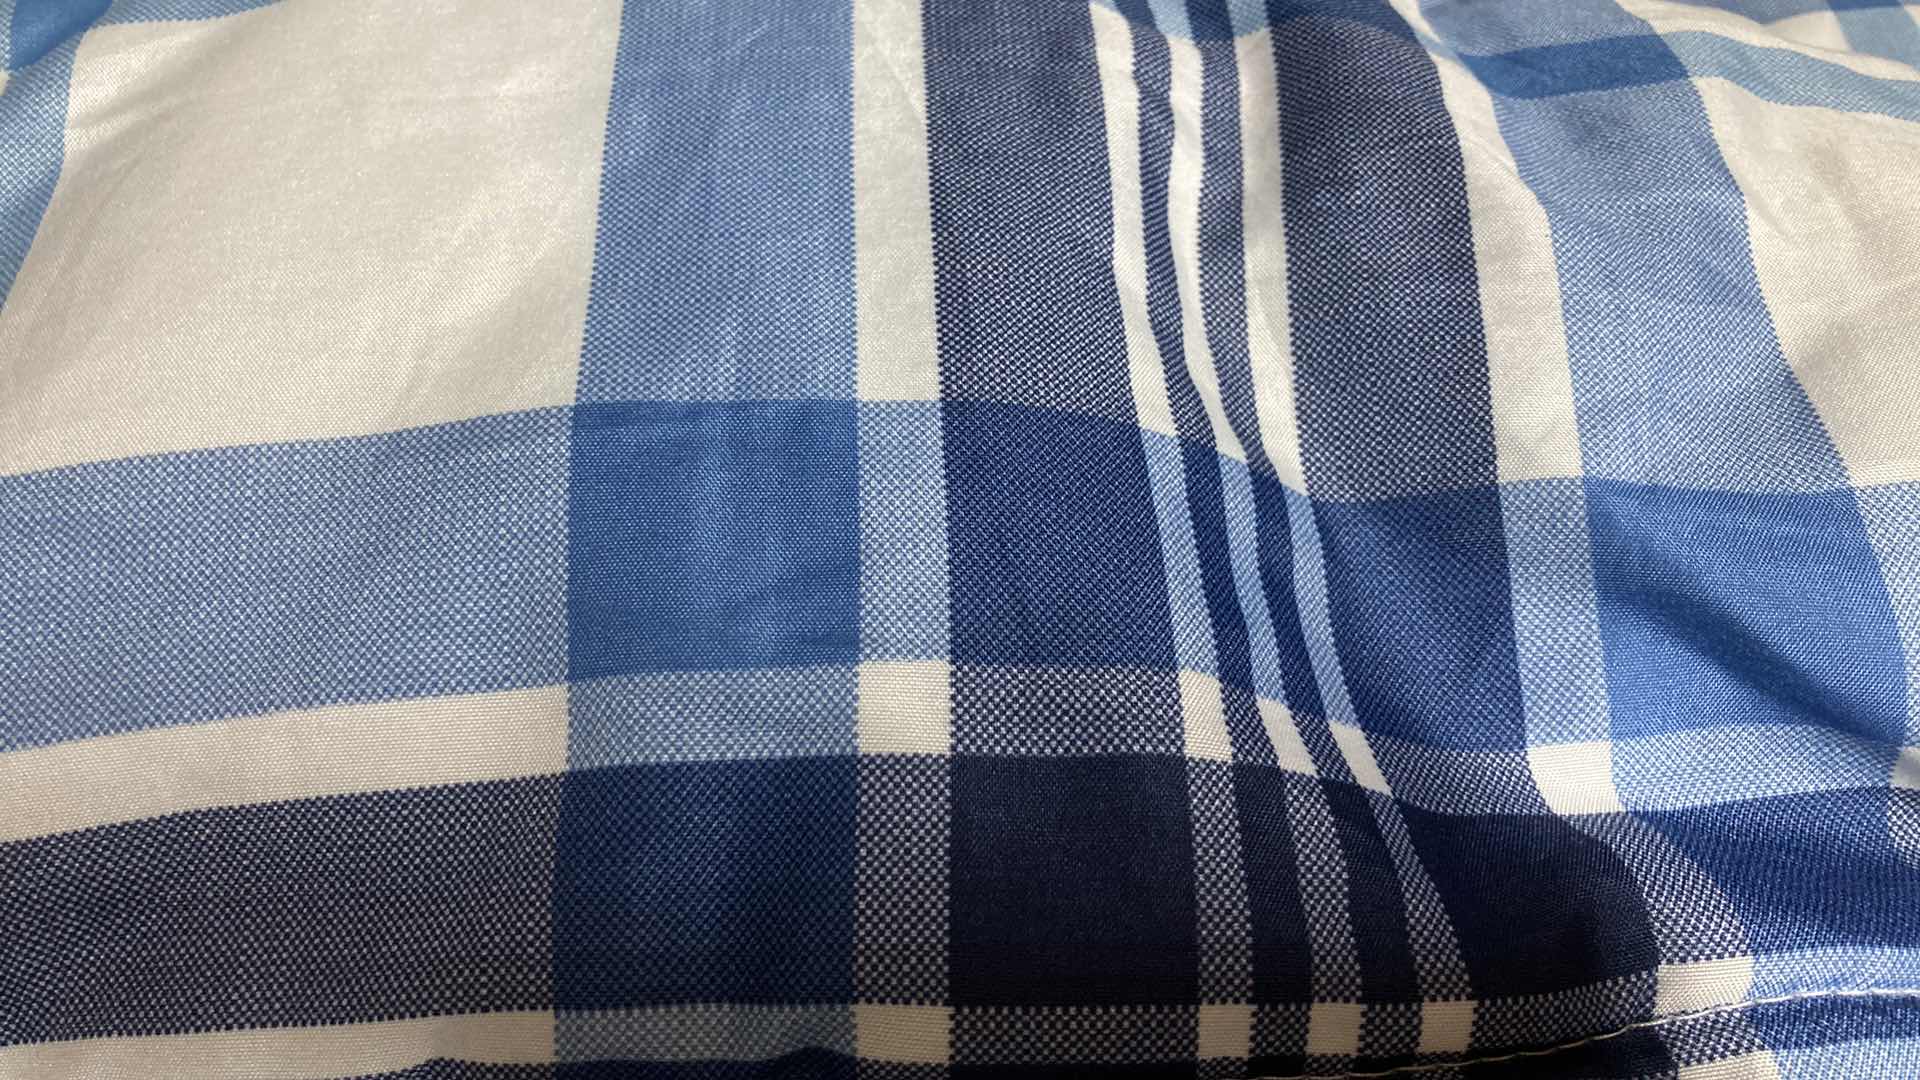 Photo 2 of MAINSTAY BLUE & WHITE PLAID COMFORTERS-2 QUEEN SIZE 1 FULL SIZE